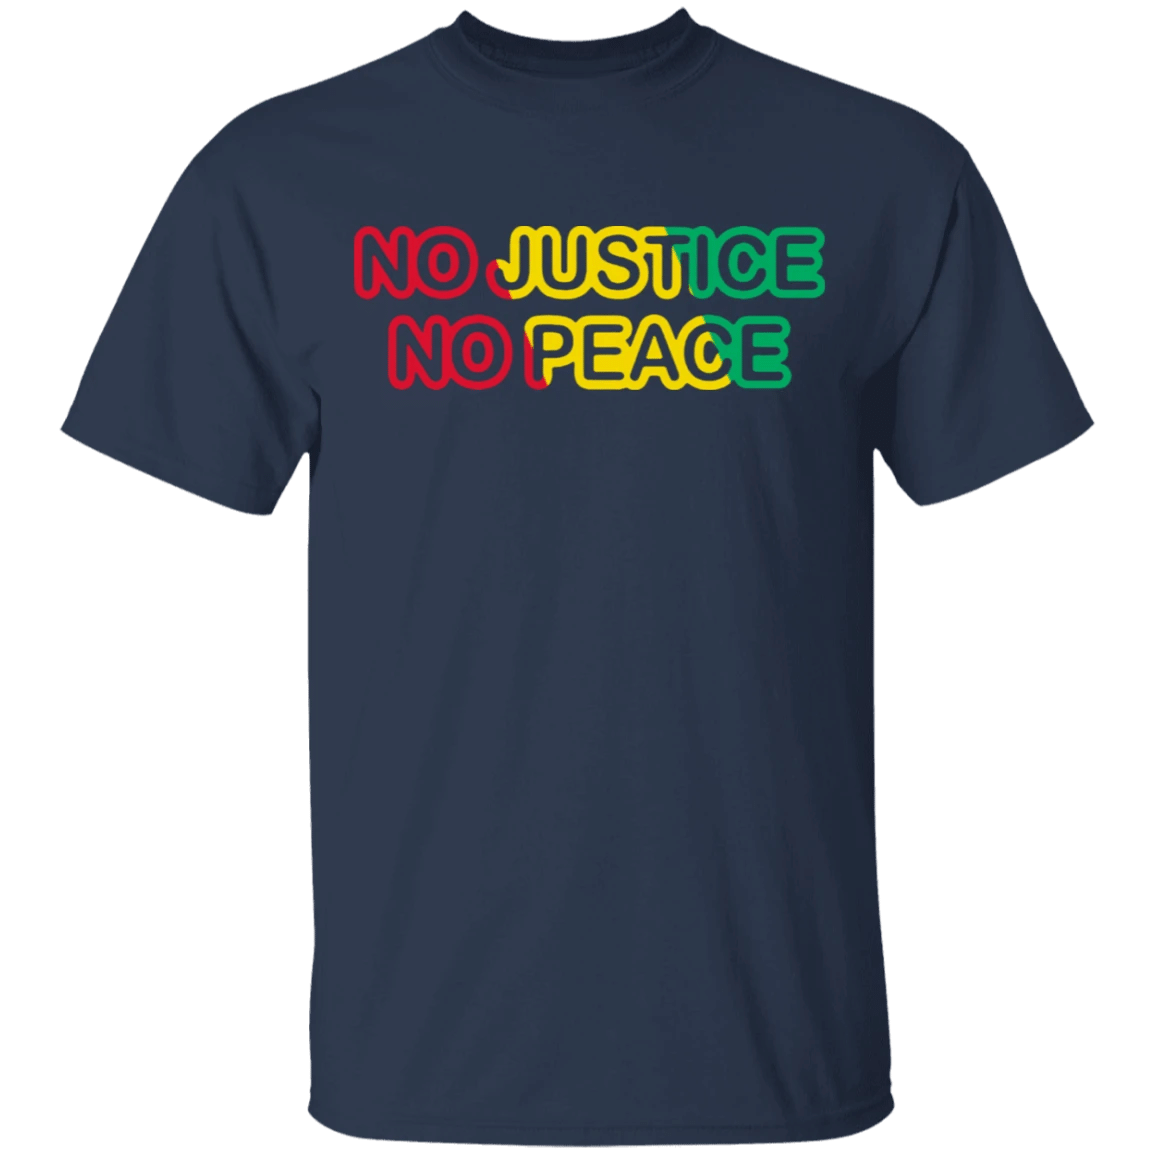 No Justice No Peace T-Shirt African Sign Against Racism BLM Feminist Shirts Justice For Breonna